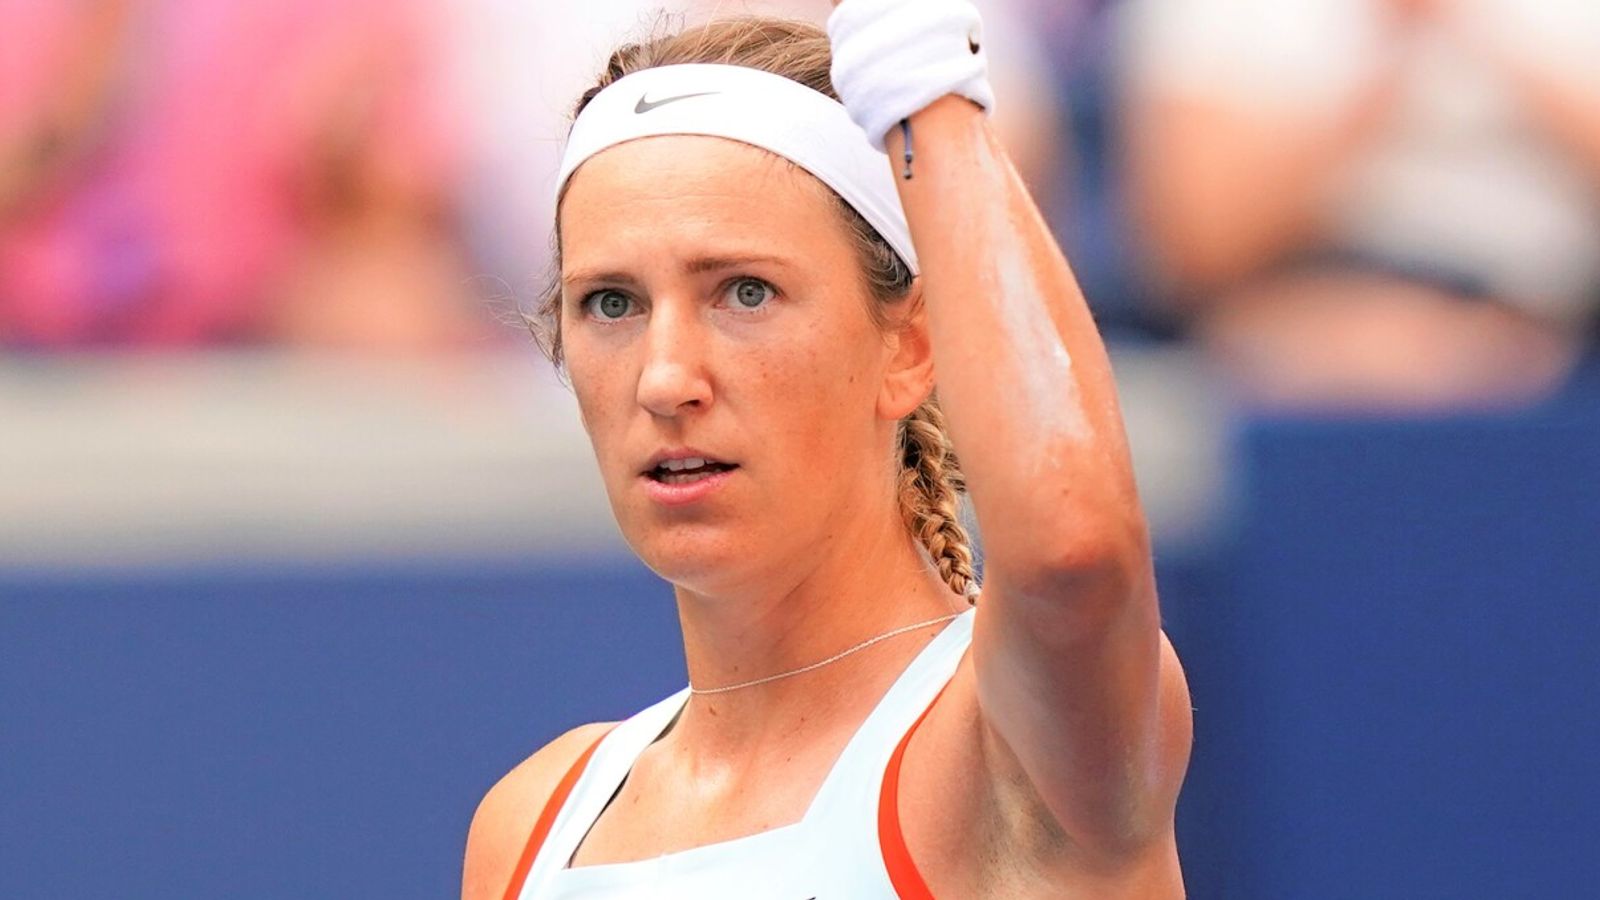 Victoria Azarenka raises fears about sexual abuse and hopes young female players can receive more support